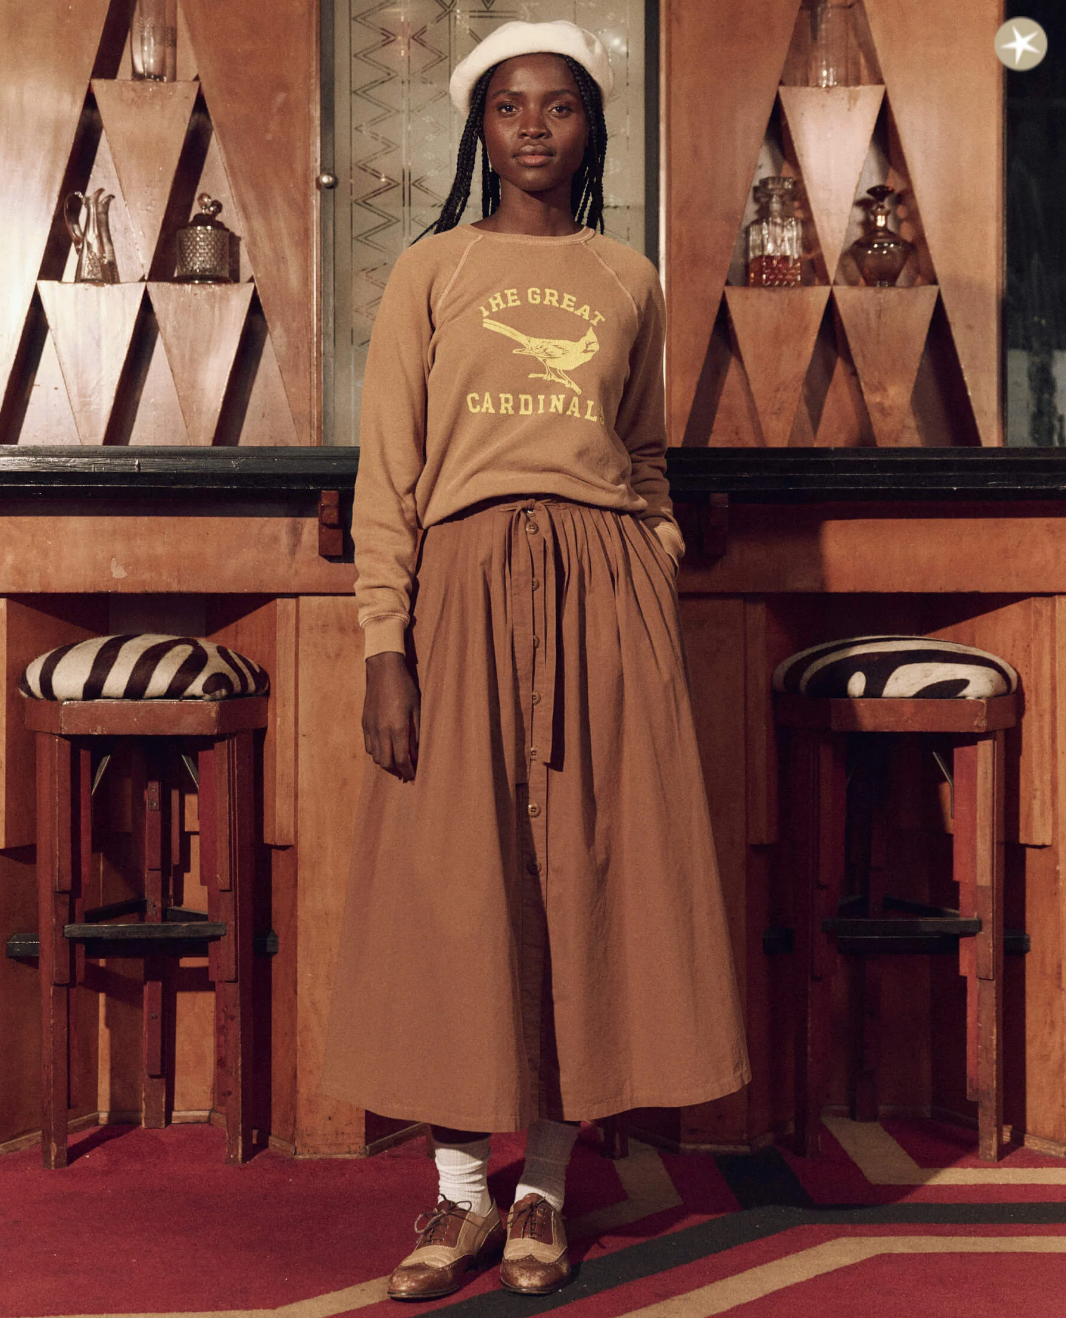 A woman stands in a classic, bungalow-style room wearing a brown midi skirt, The Shrunken Sweatshirt in Washed Suntan with Perched Cardinal graphic by The Great Inc., a cap, and white socks with brown loafers.